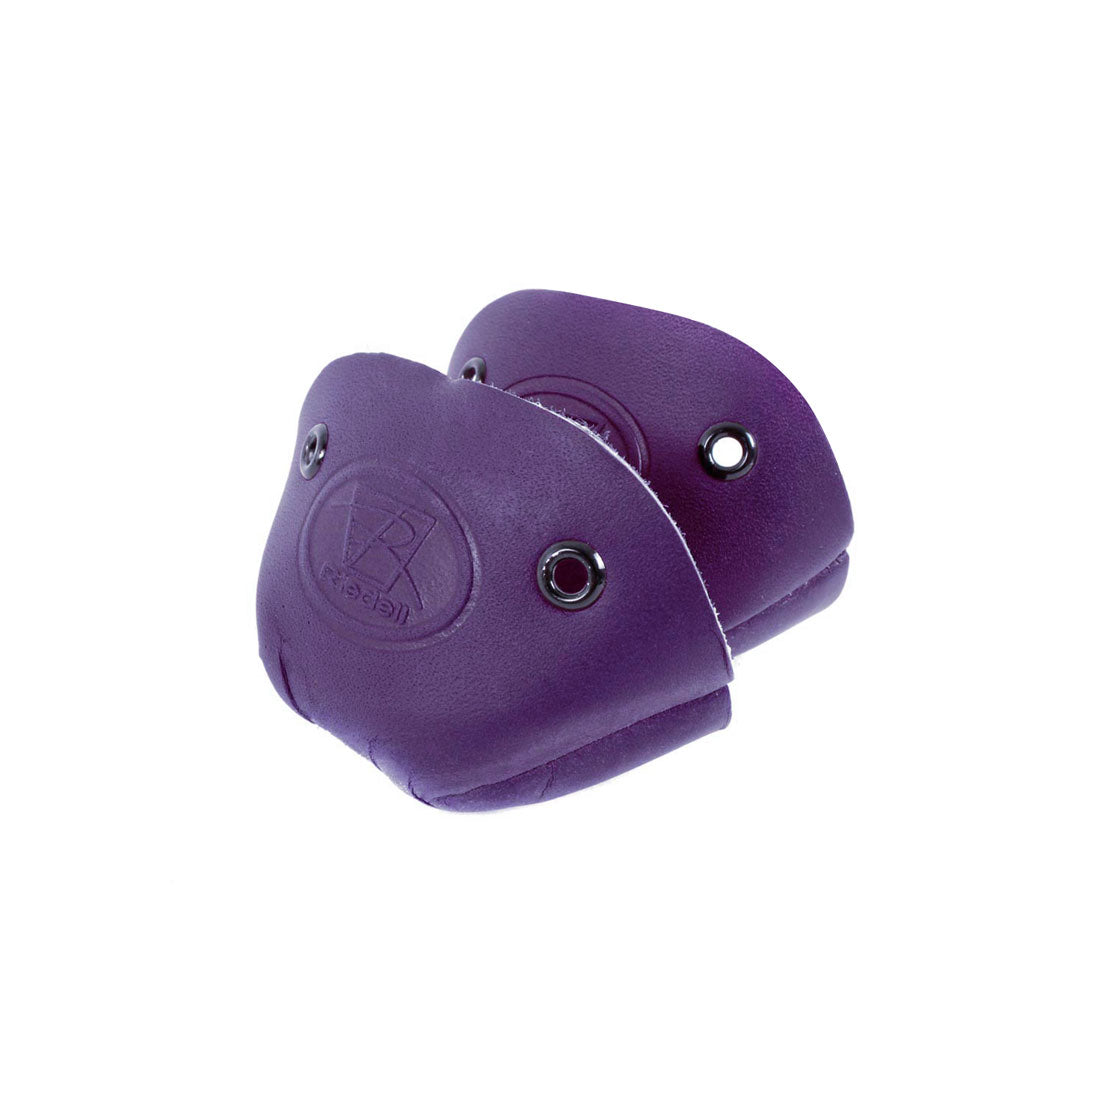 Riedell Toe Cap 2pk - Leather Purple Roller Skate Hardware and Parts